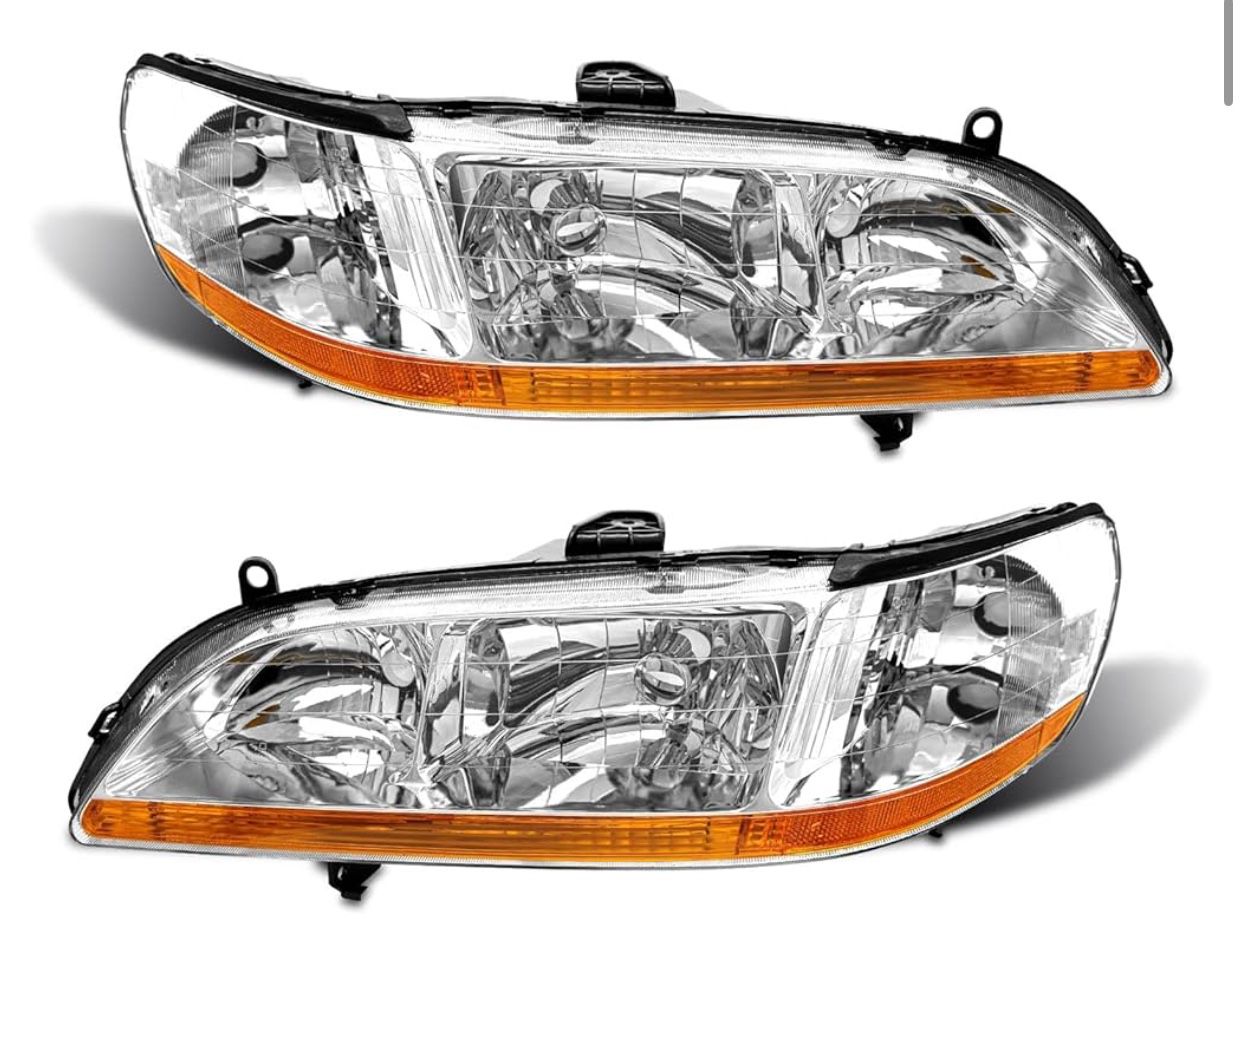 for 1 2000 2001 2002 Accord Headlight Assembly compatible with 98 99 00 01 02 Honda Accord 2/4Dr Clear Lens Chrome Housing Amber Reflector Hea